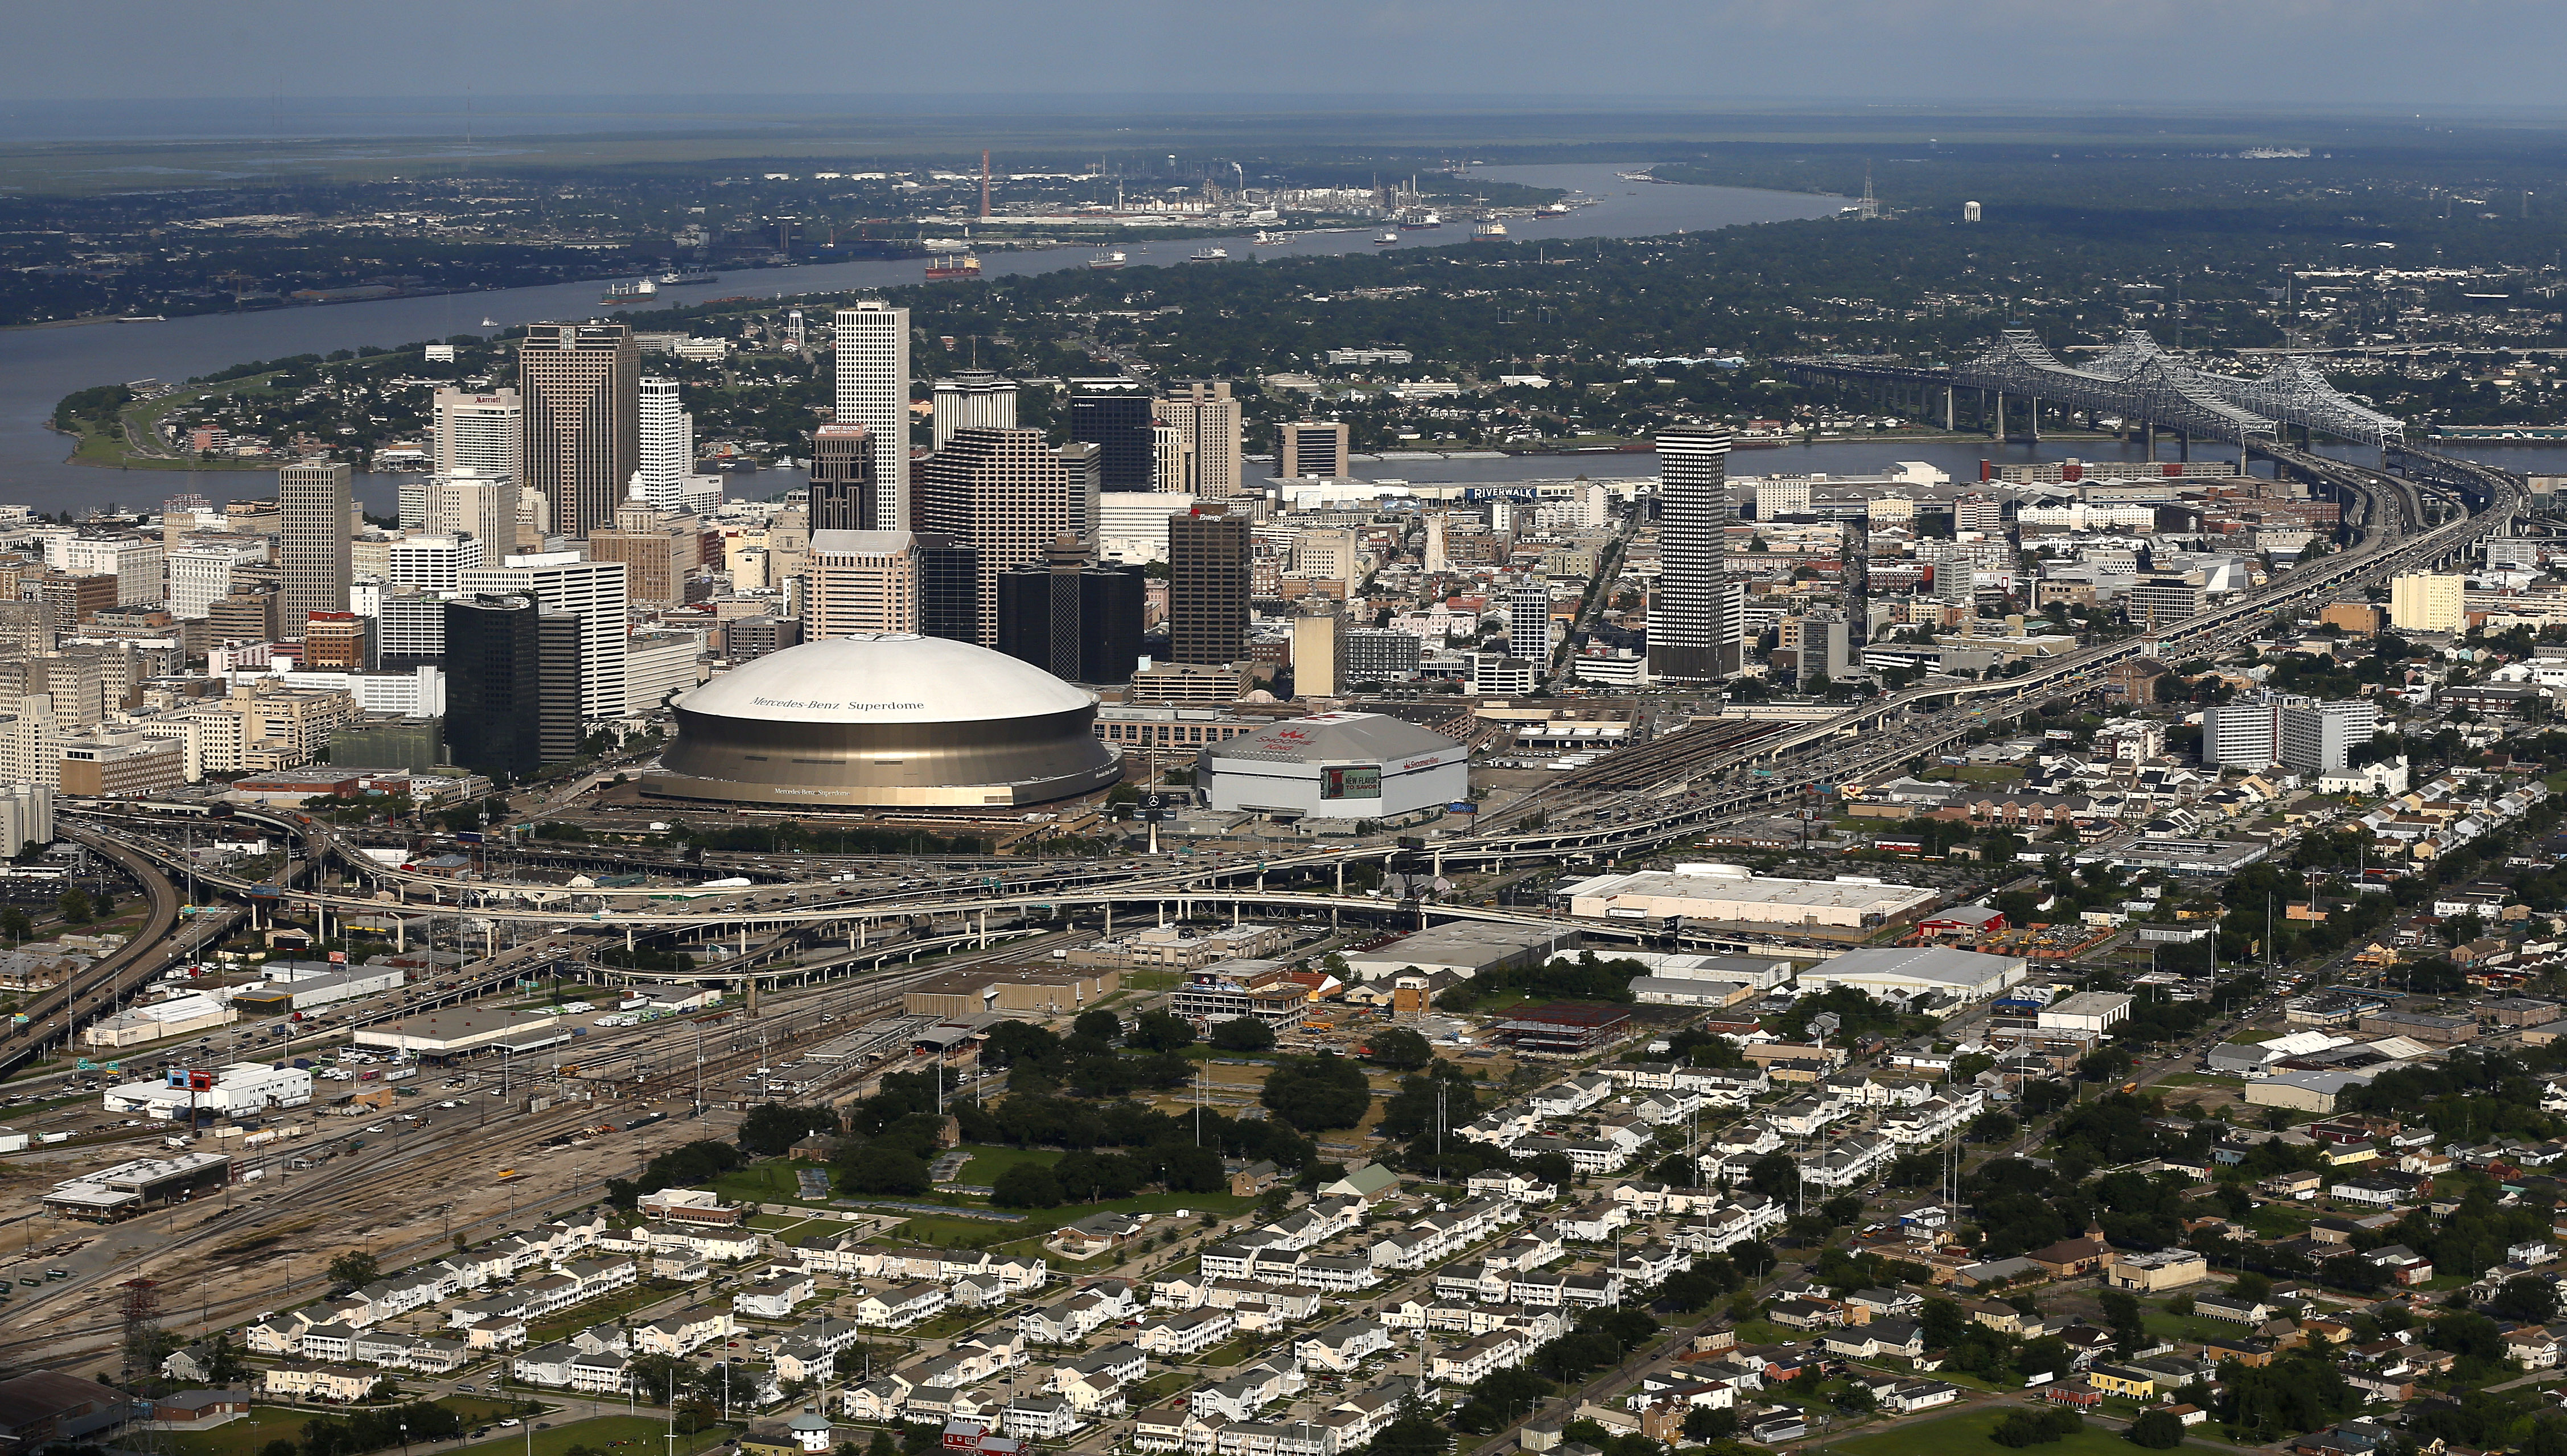 The skyline of New Orleans